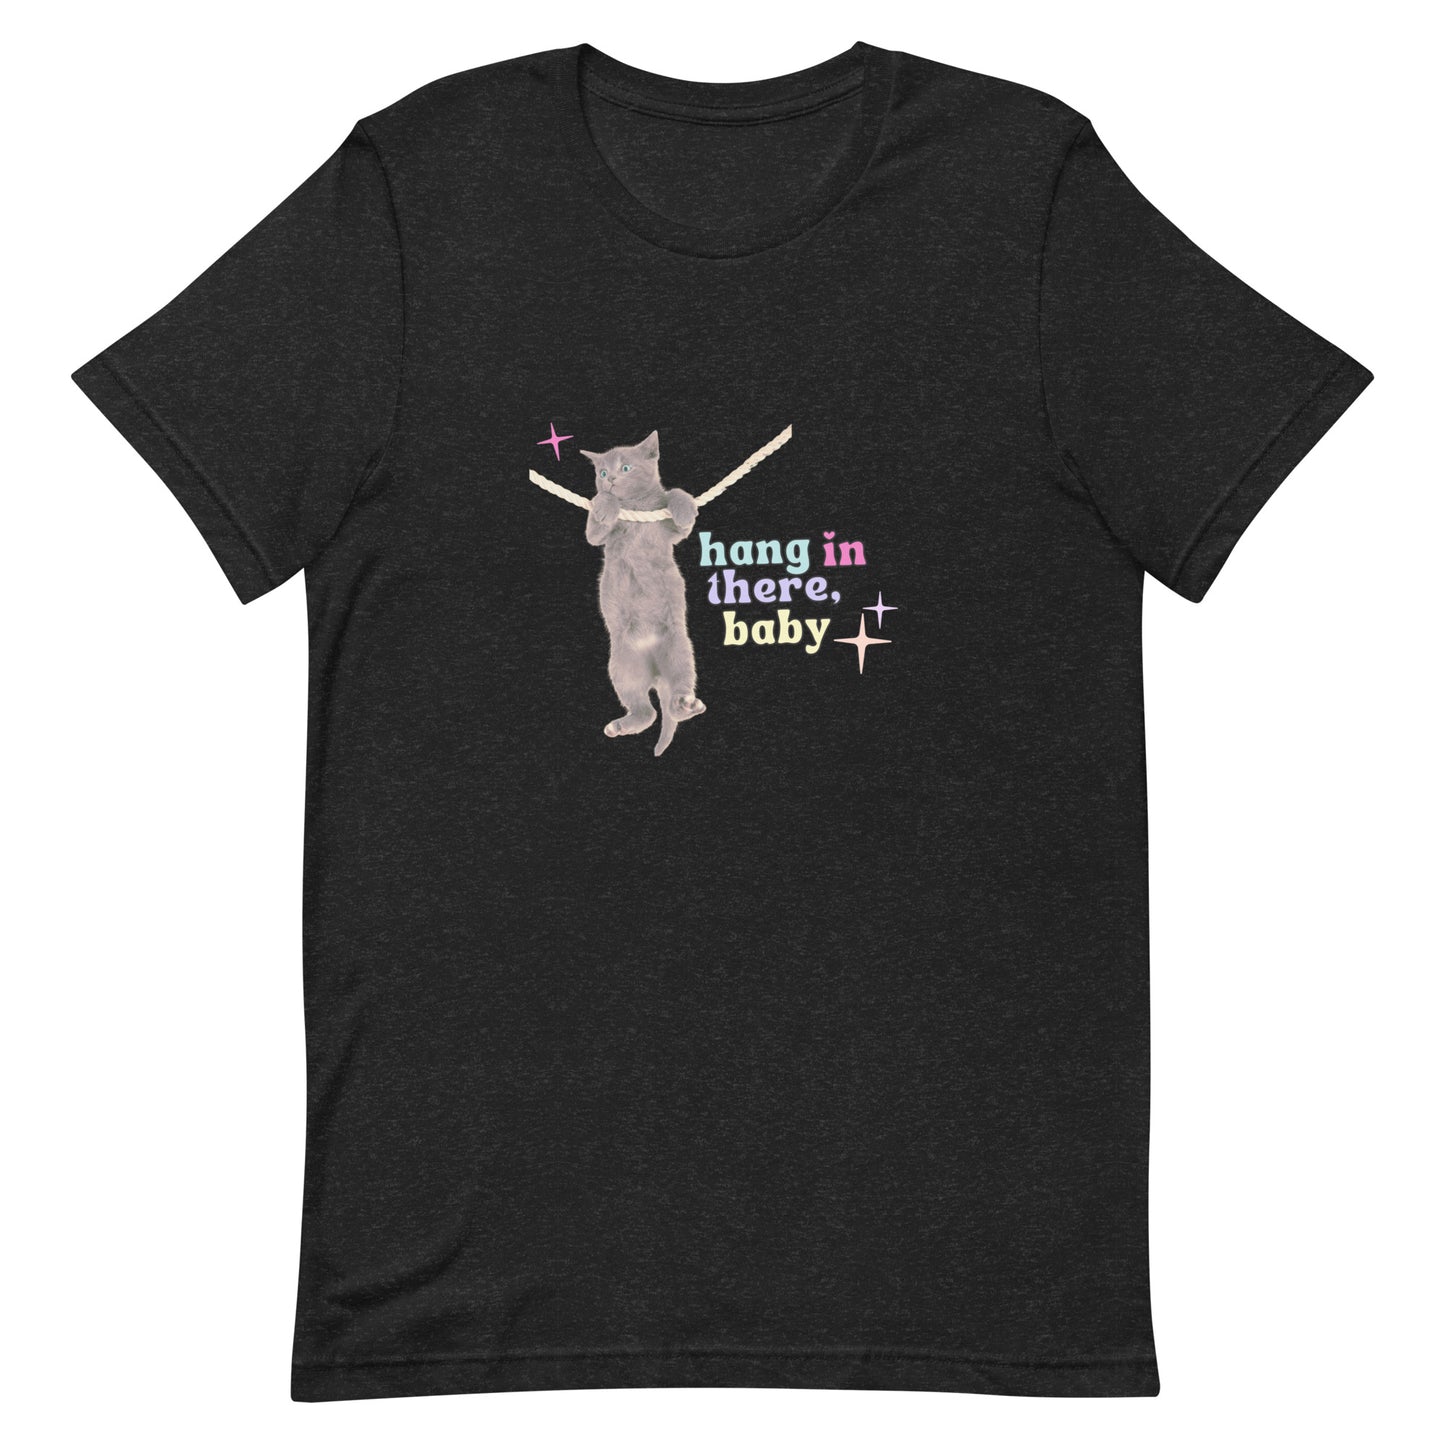 Hang In There Baby t-shirt